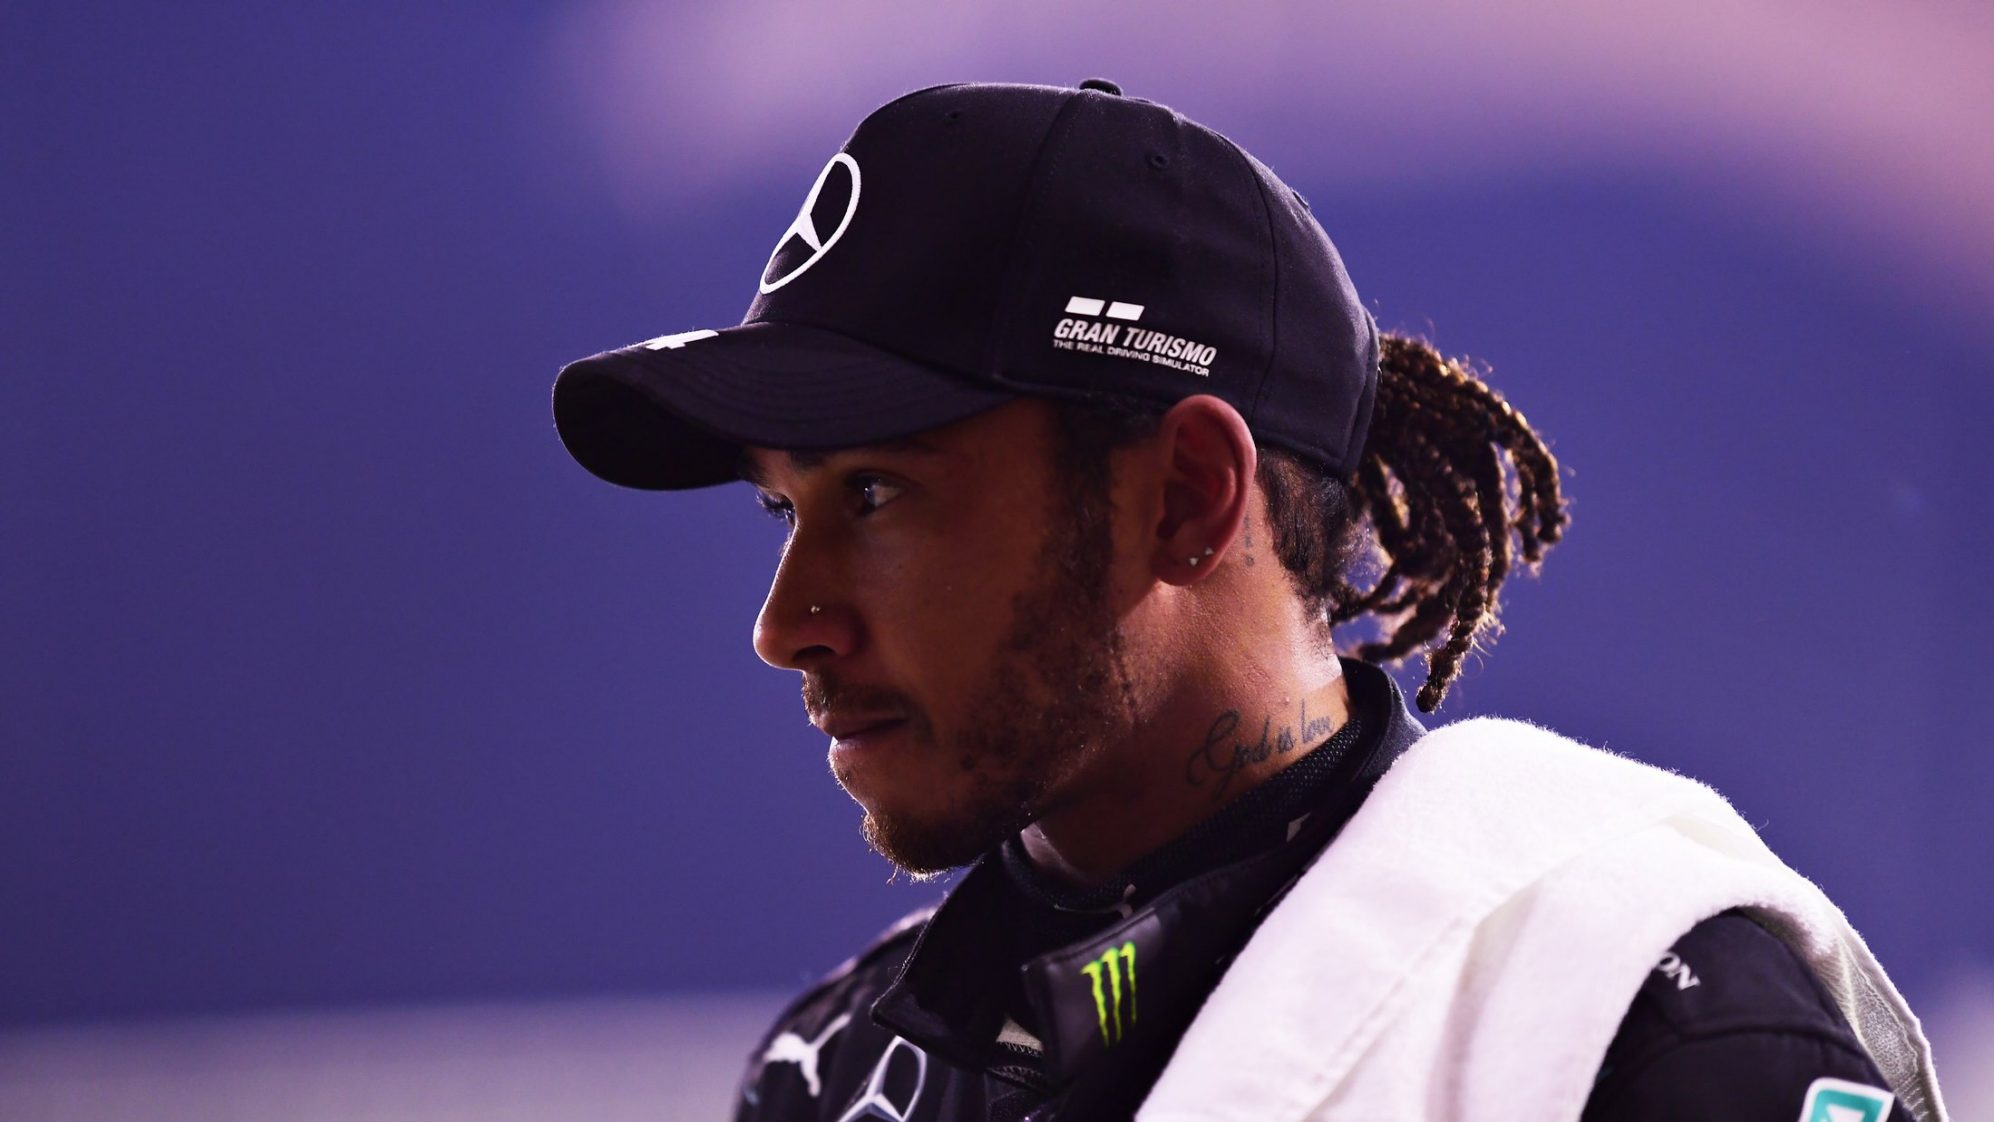 Lewis Hamilton to sit out Sakhir Grand Prix after testing positive for COVID-19